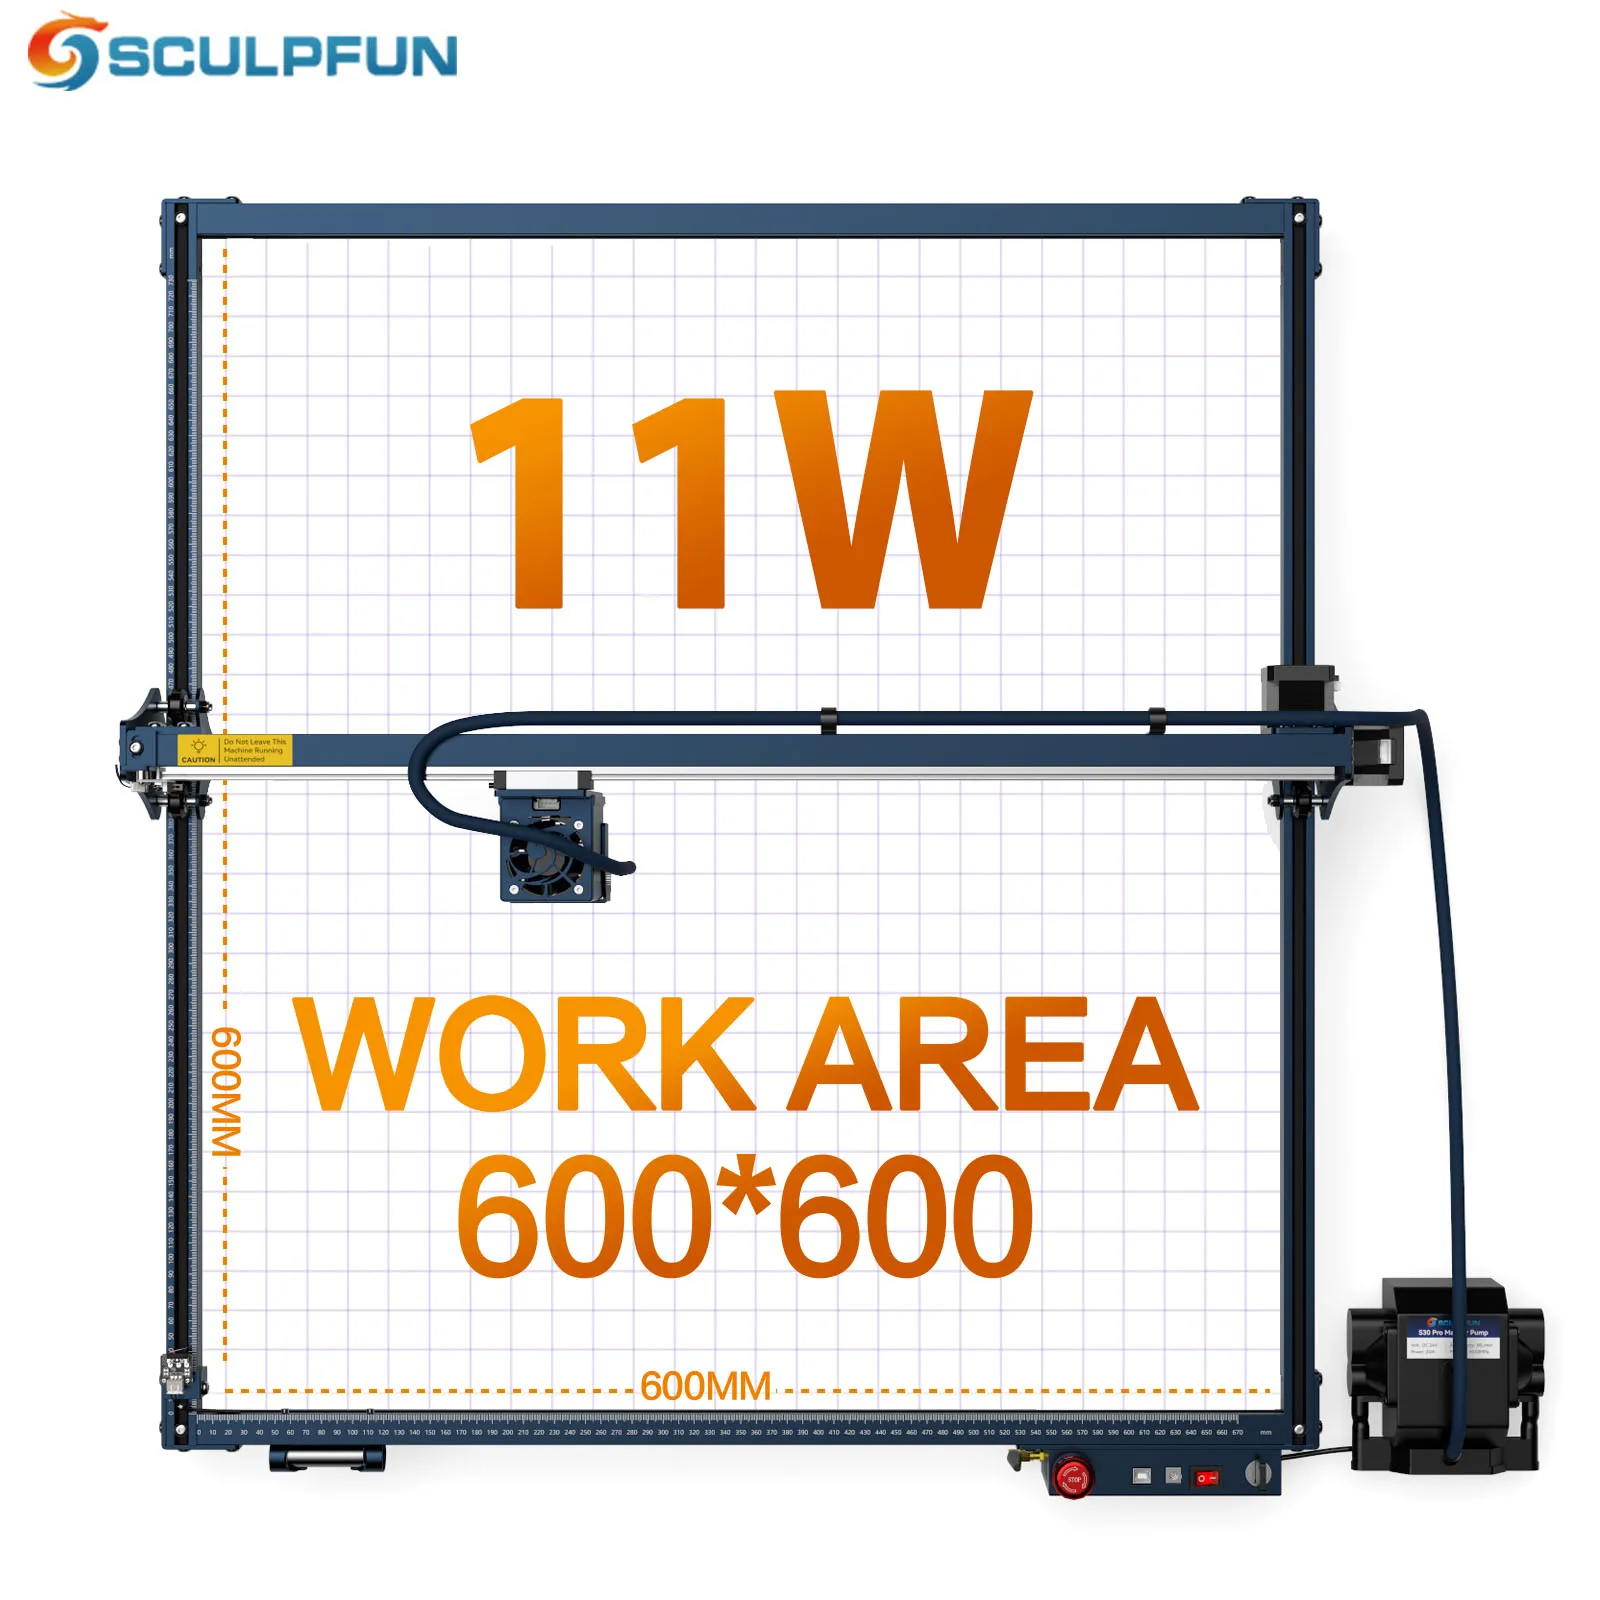 New SCULPFUN S30 Ultra-11W Laser Engraving Machine 600x600mm Engraving Area Laser Cutter With Automatic Air Assist M8 Main Board loading=lazy